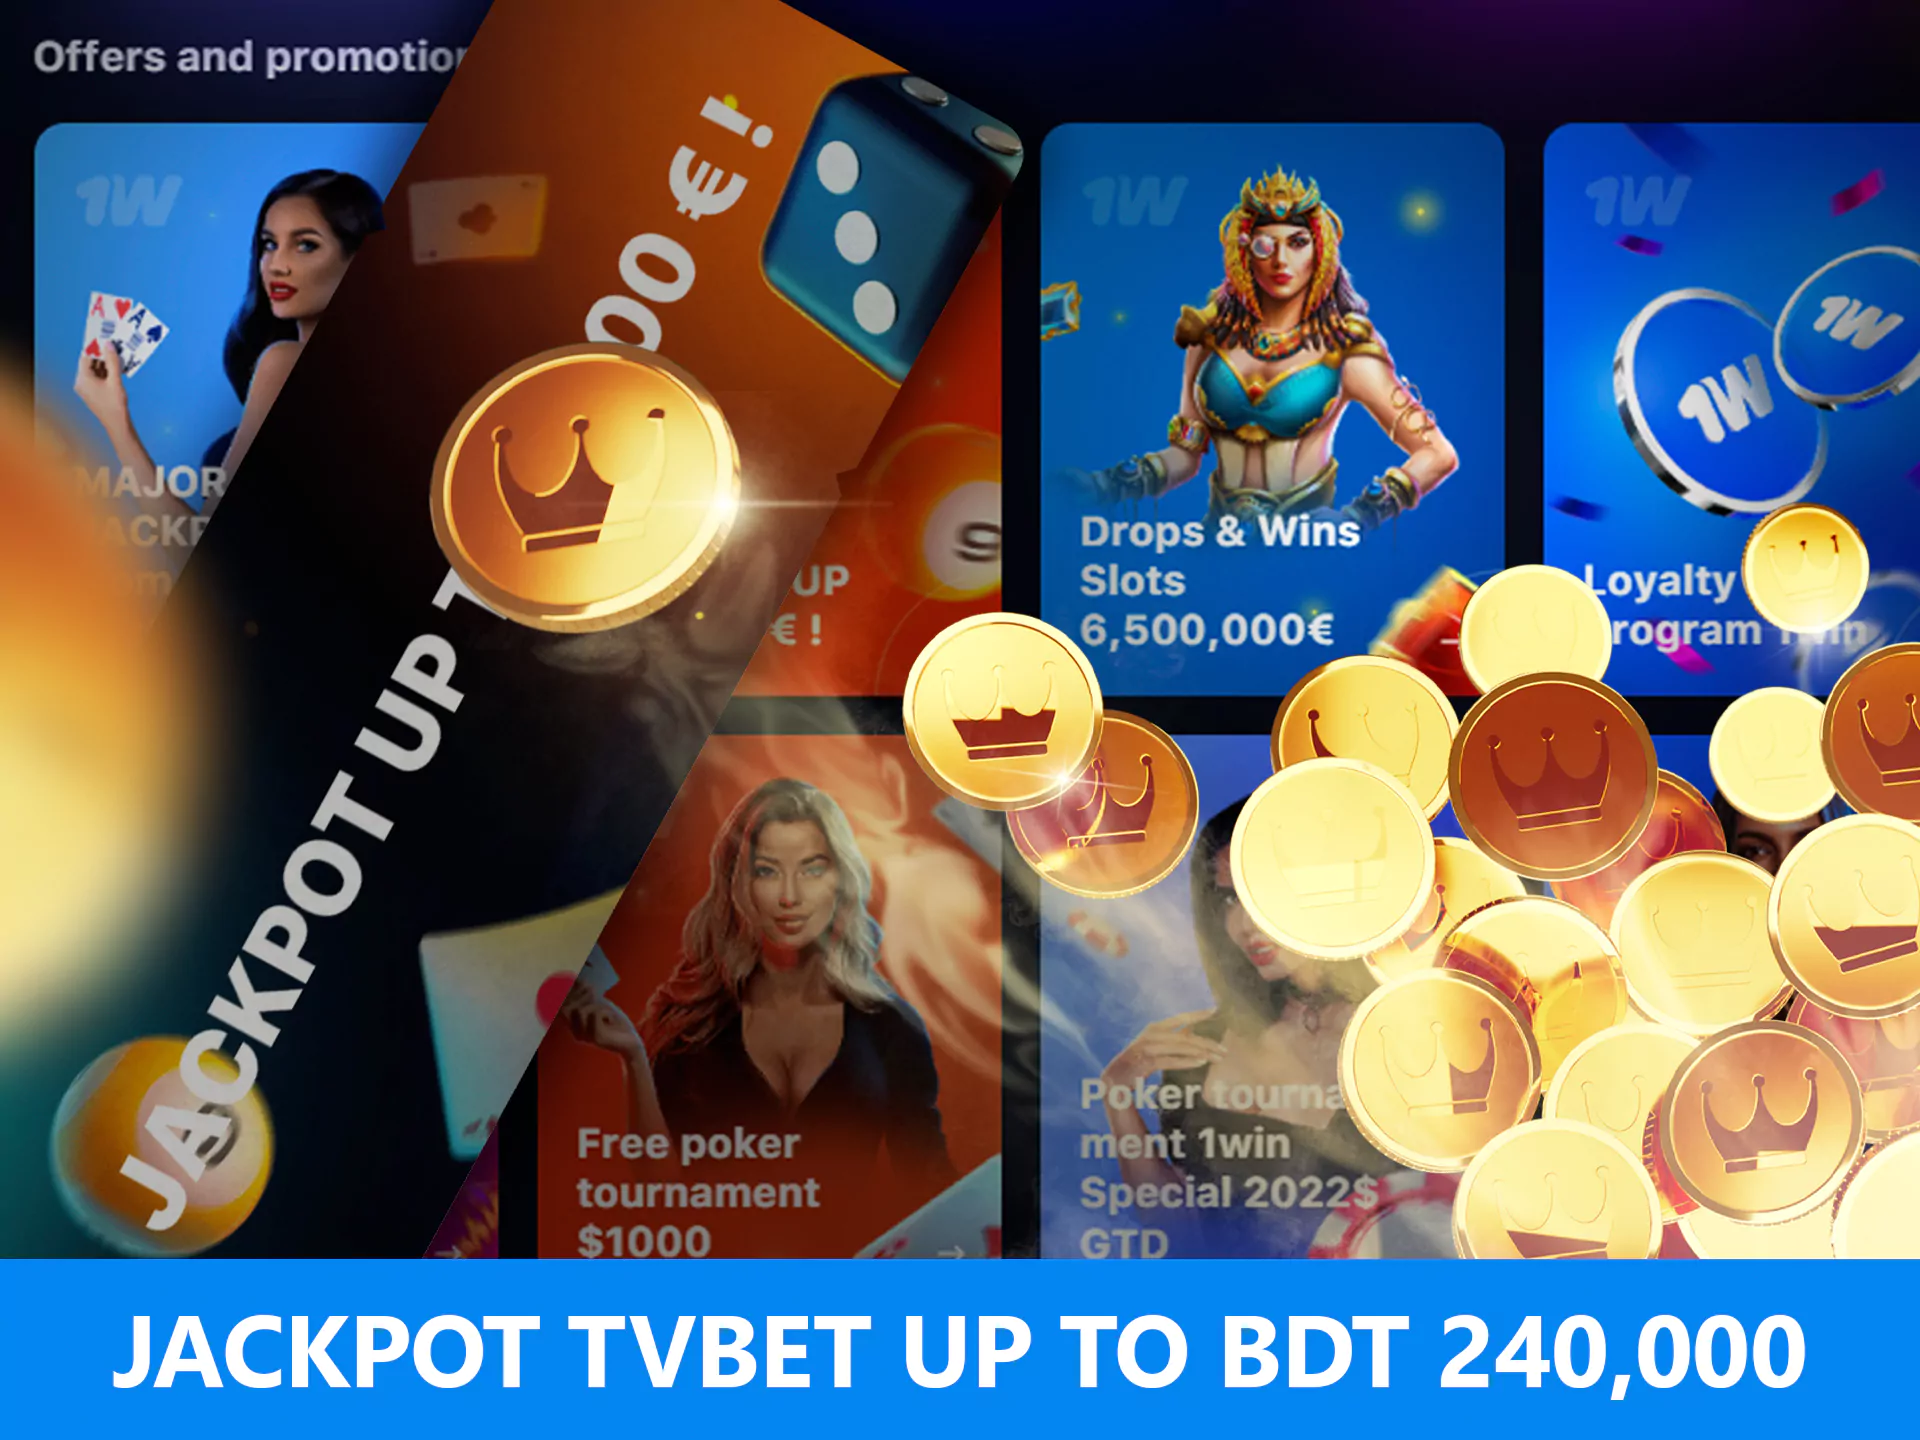 Playing the TVBet games, you have the chance of winning a jackpot.